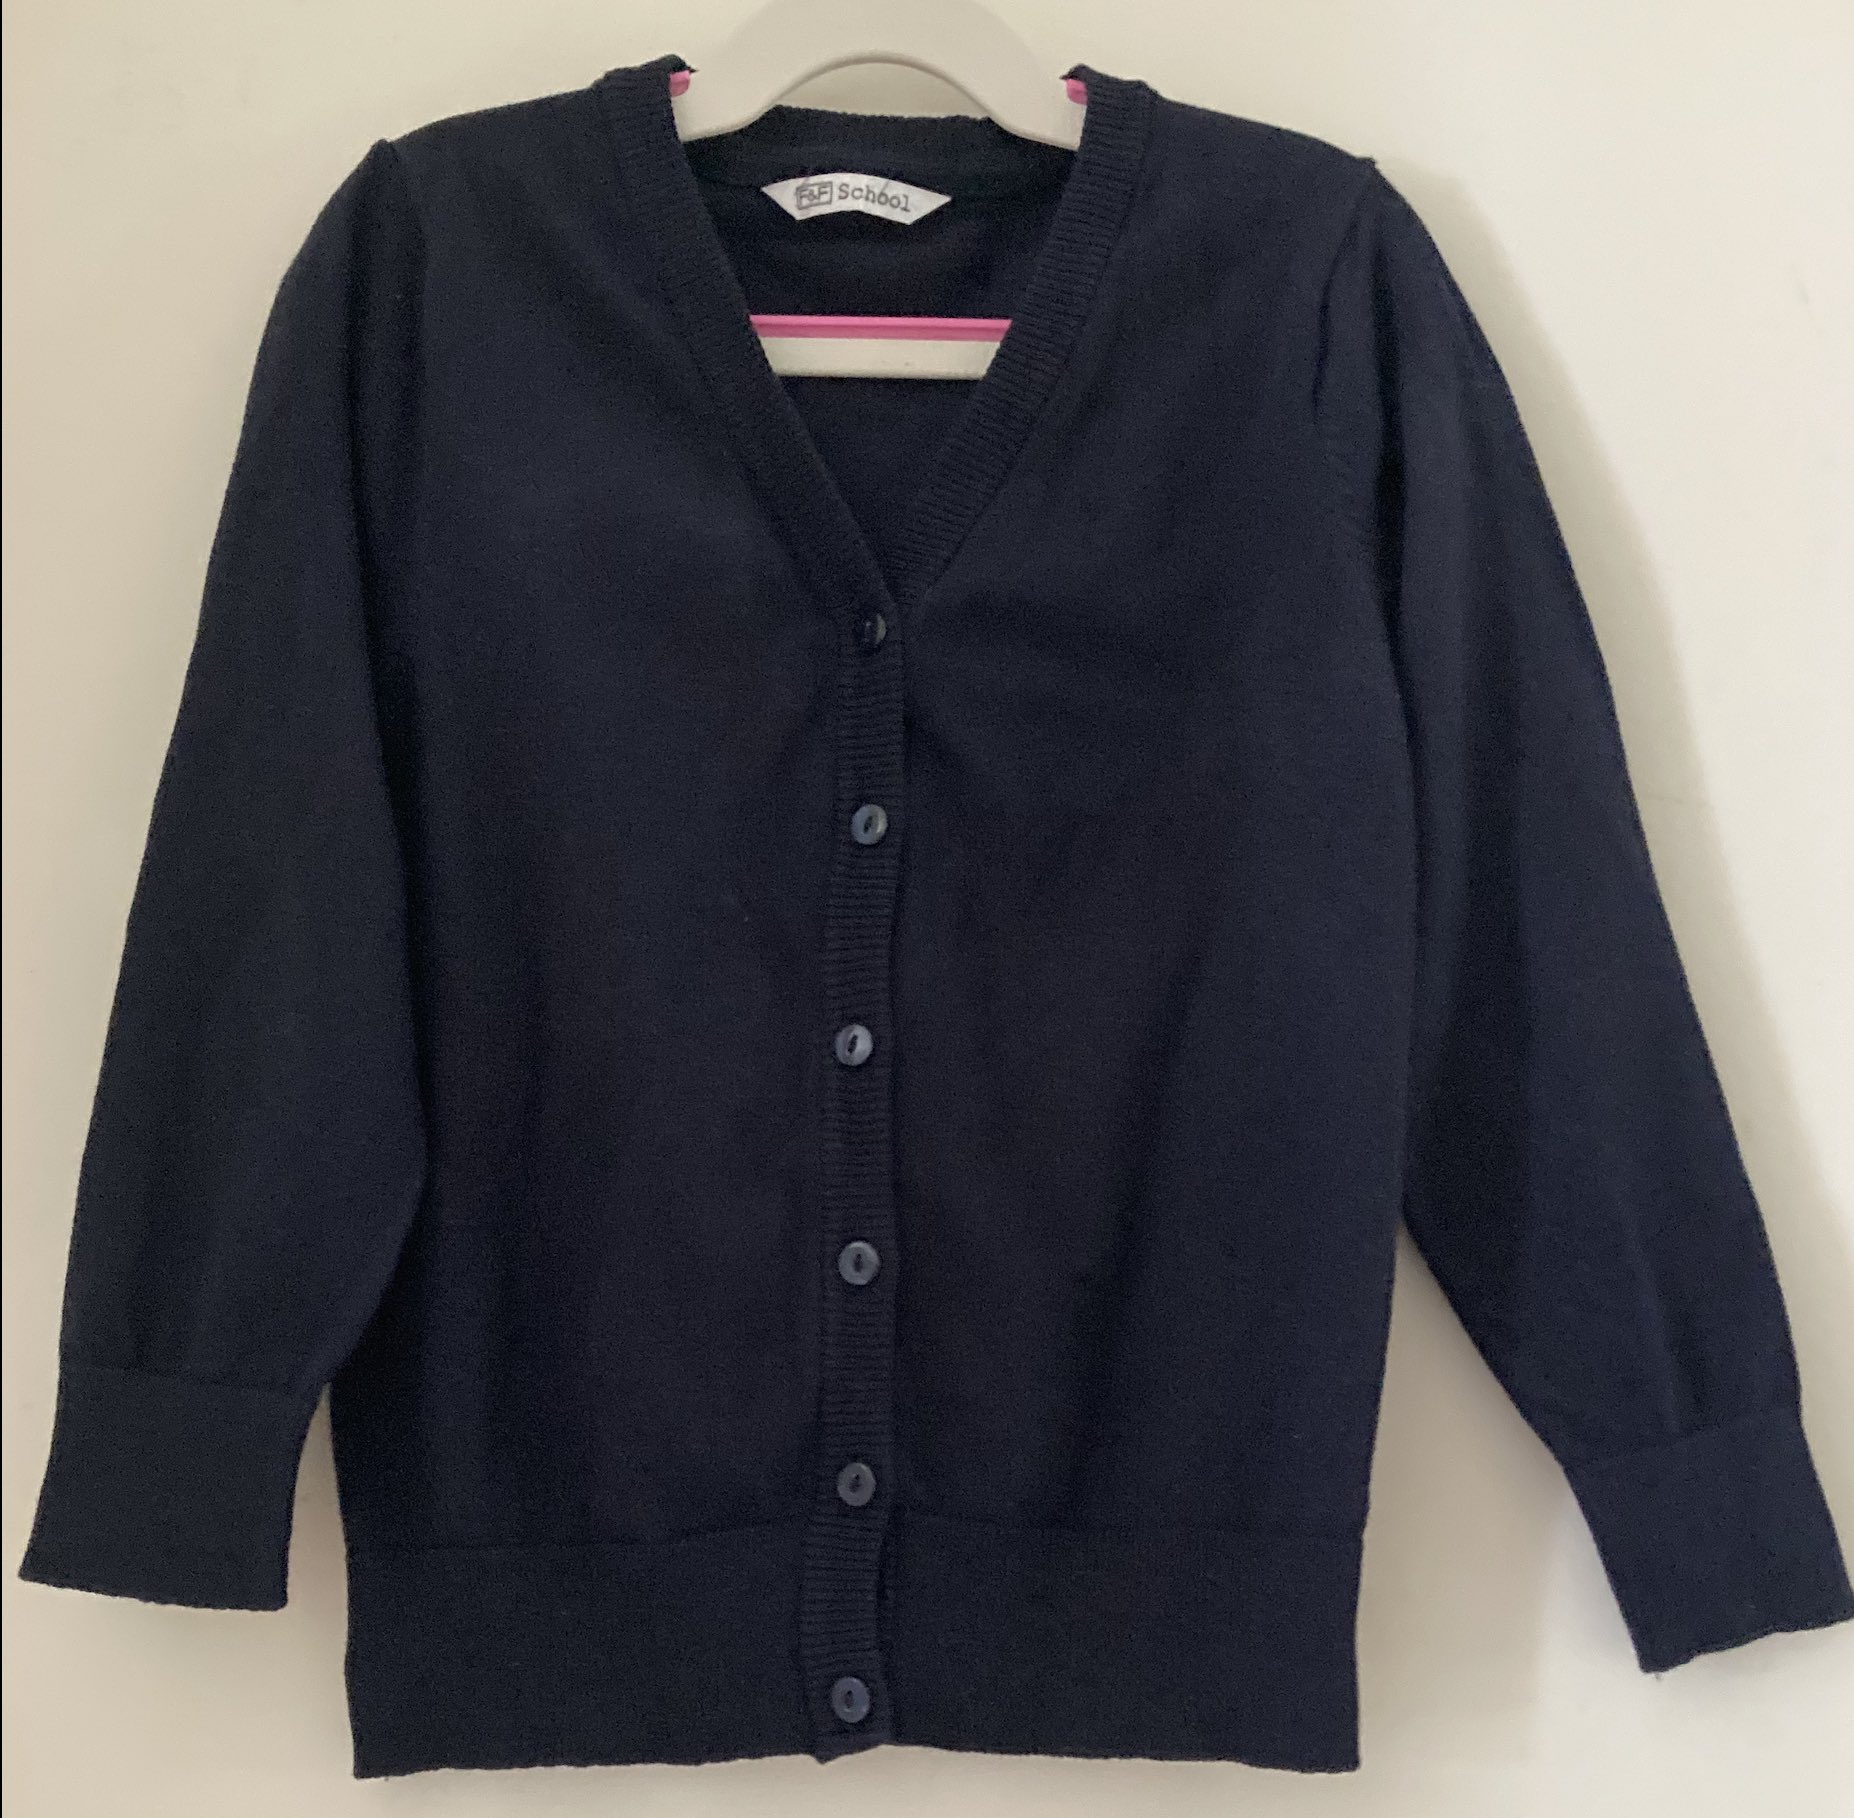 Girls' Navy V-neck Cardigan, Button Front 7-8 Y